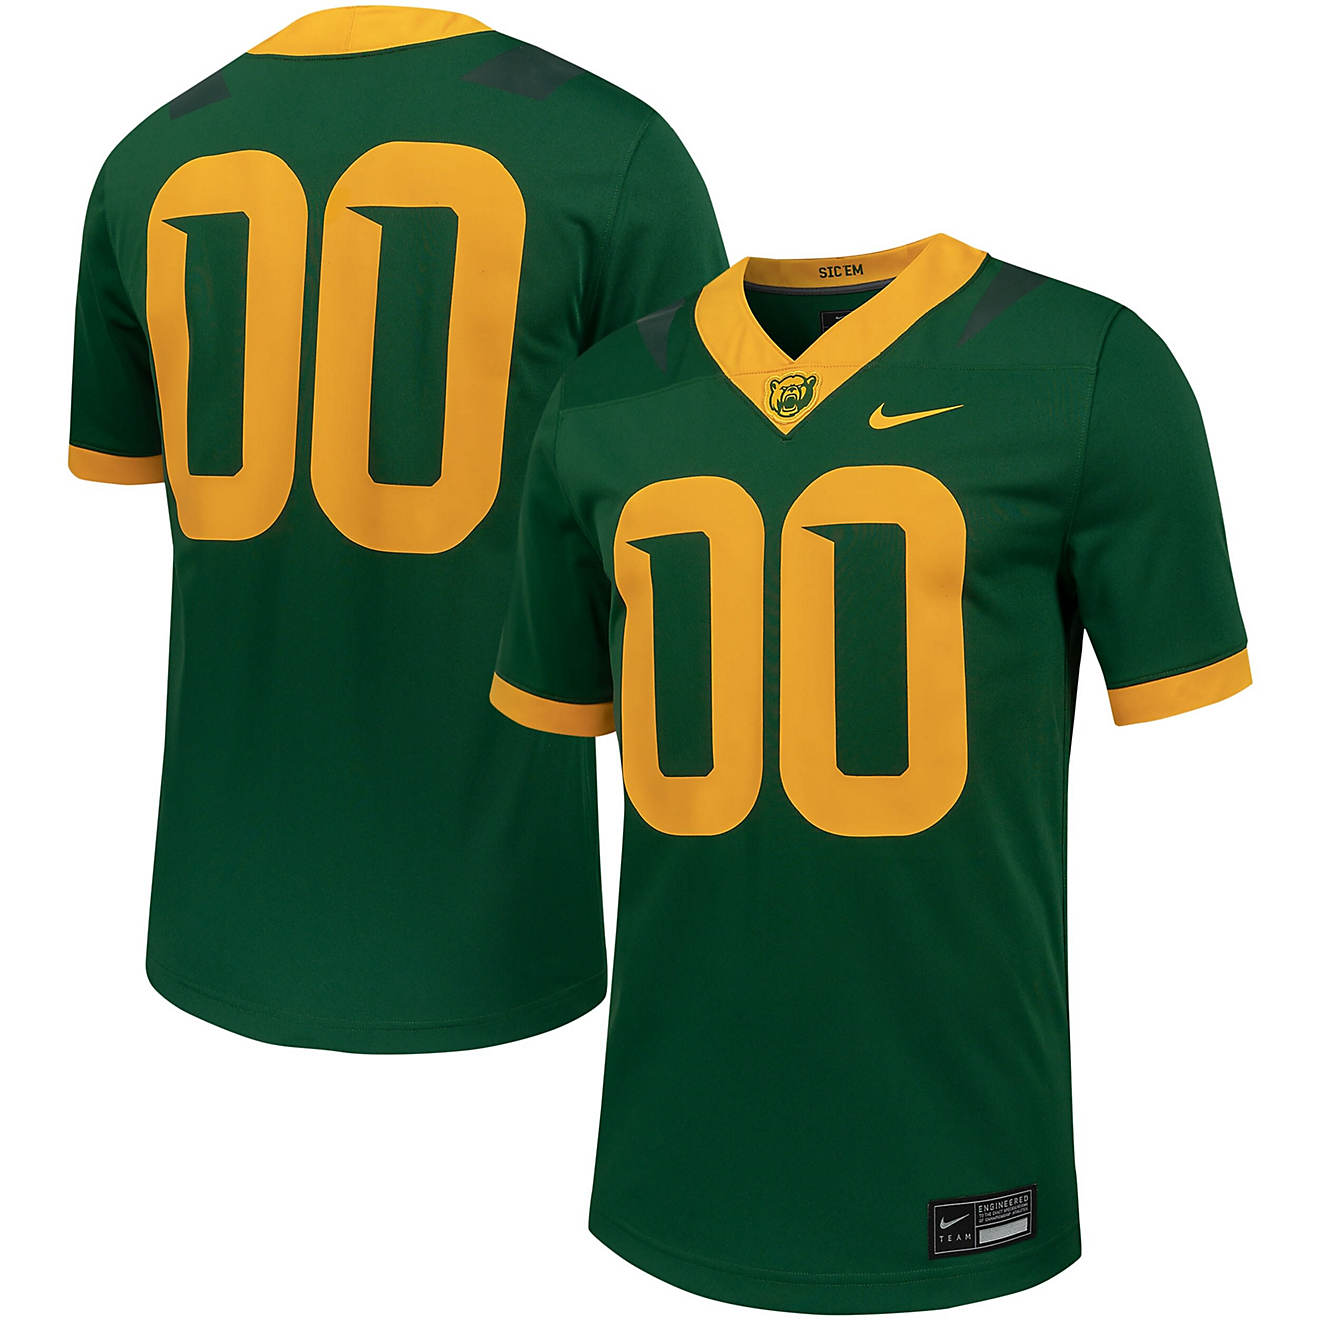 Nike 00 Baylor Bears Untouchable Football Replica Jersey                                                                         - view number 1